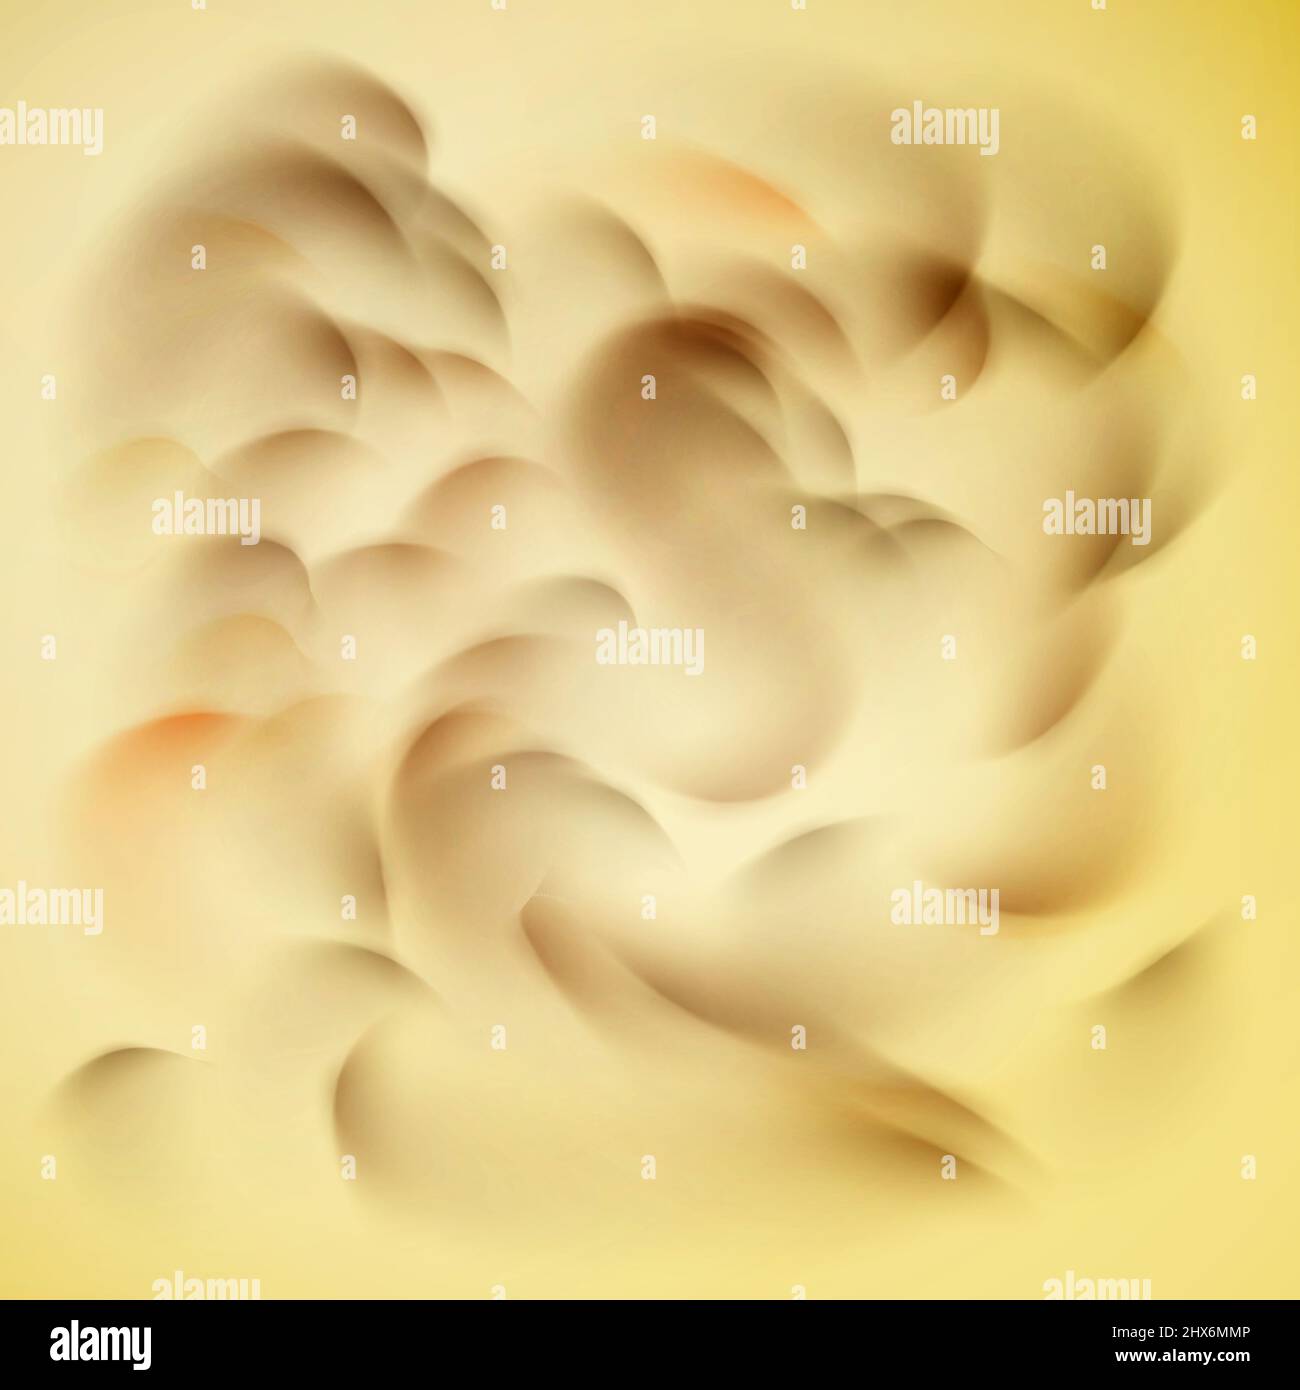 Waves or curls on a beige background abstract background. Stock Photo